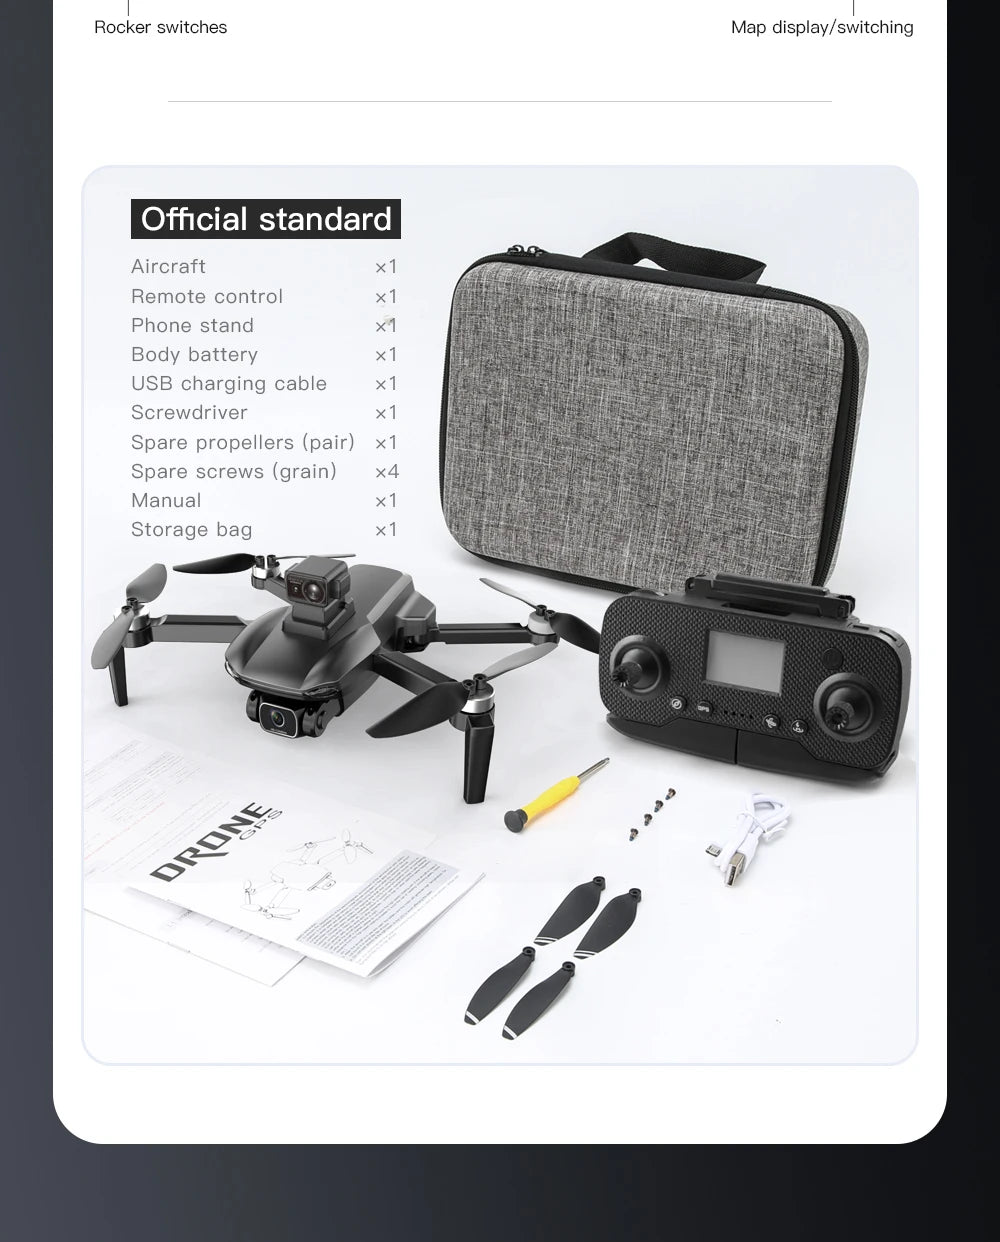 G108 Pro MAx Drone, Rocker switches Map display/switching Official standard Aircraft x1 Remote control Phone